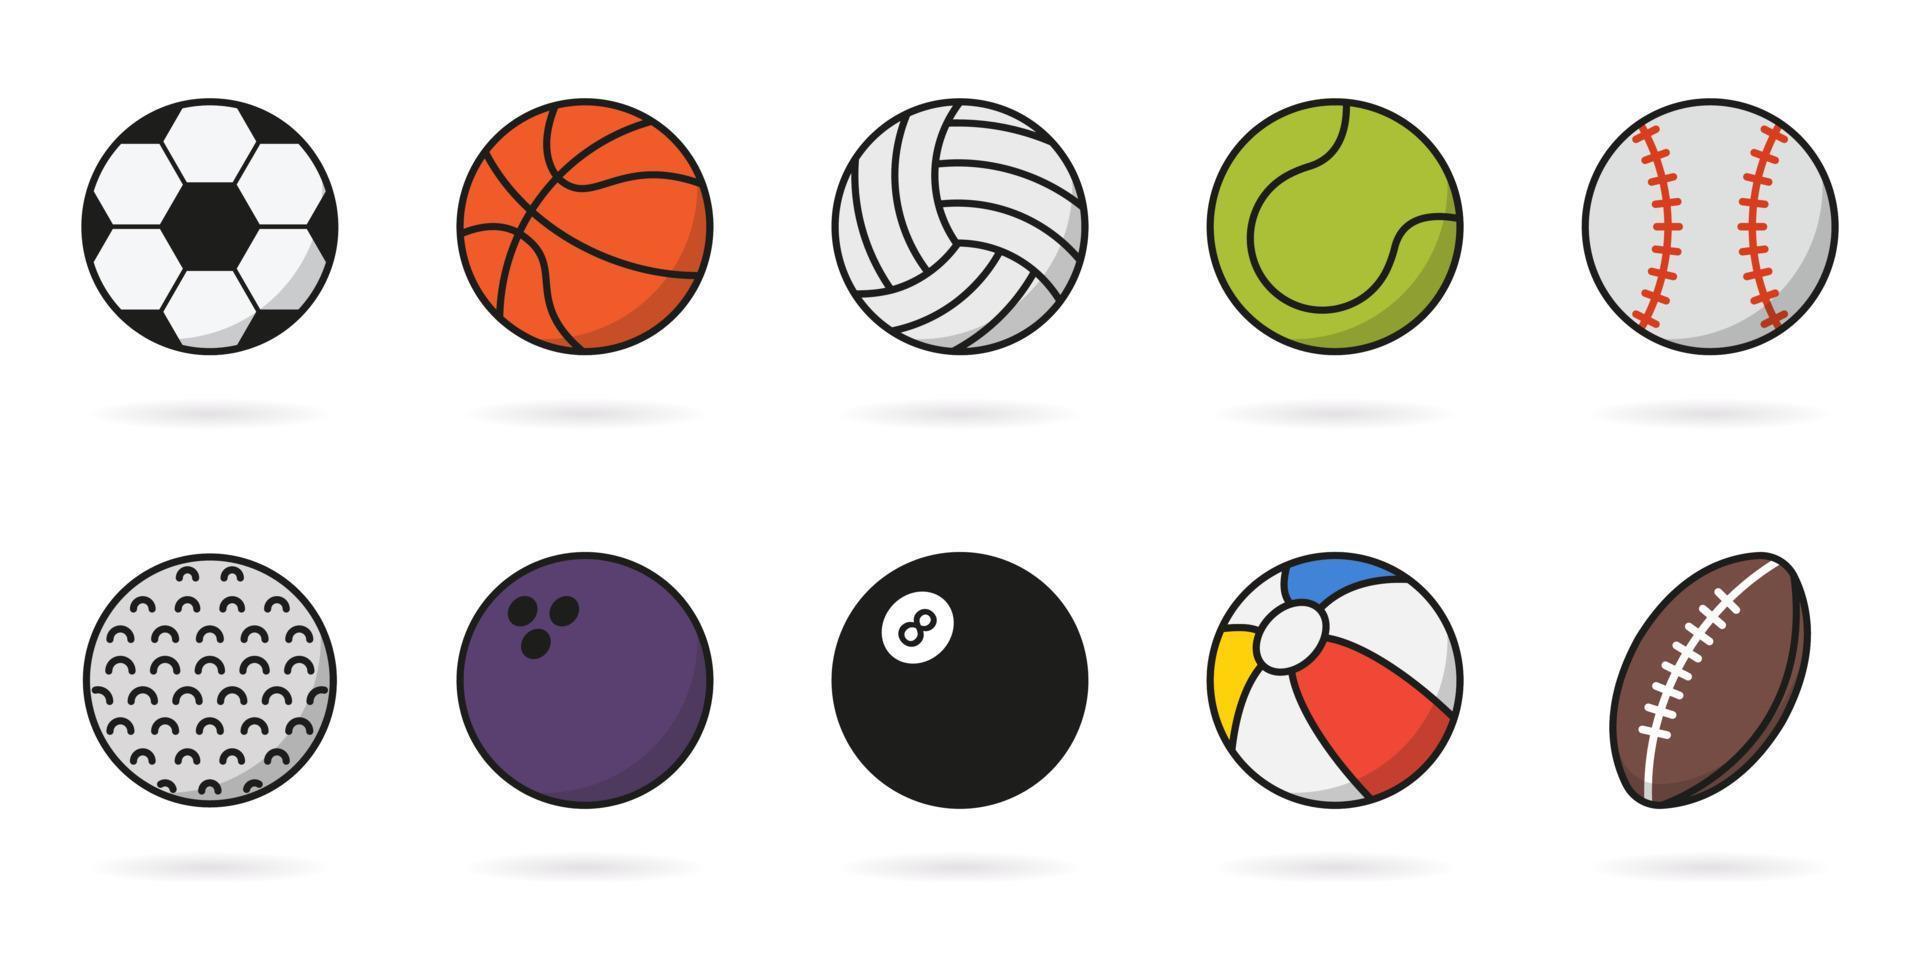 Set of Sport Game Balls Icon. Collection of Balls for Basketball, Baseball, Tennis, Rugby, Soccer, Volleyball, Golf, Pool, Bowling Pictogram. Inflatable Ball, Softball Symbol. Vector Illustration.